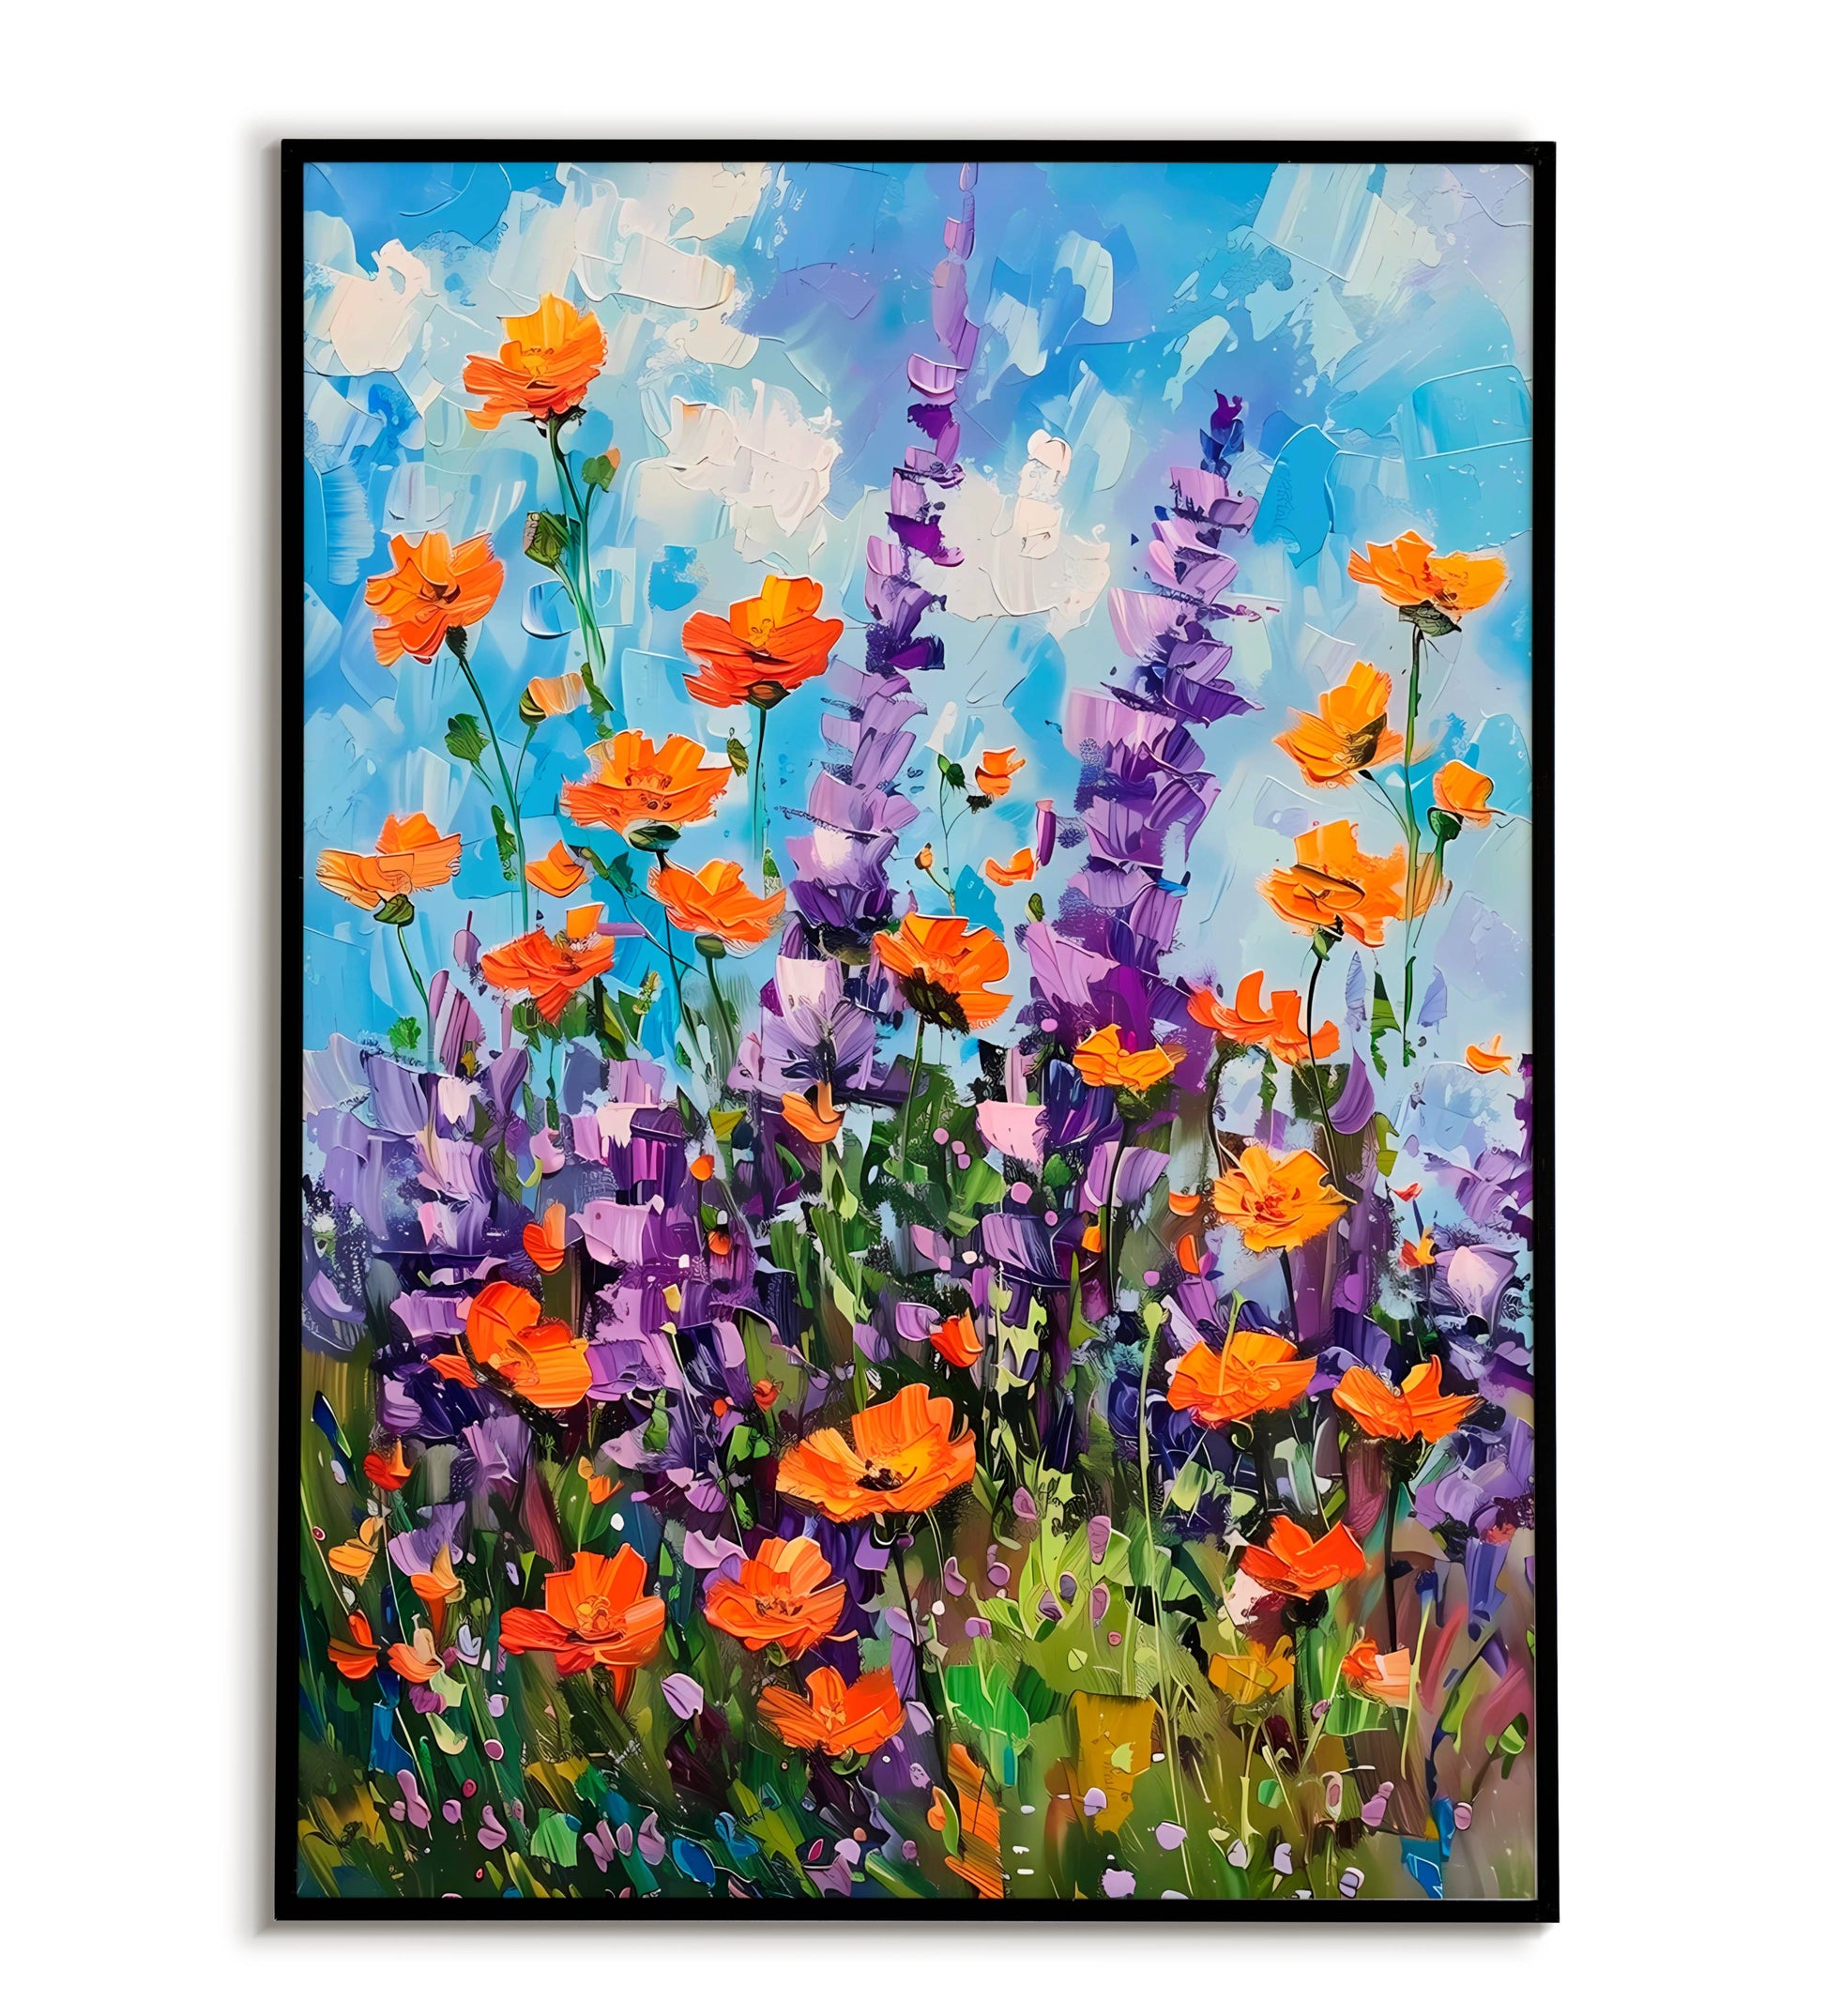 Wildflowers" abstract floral poster